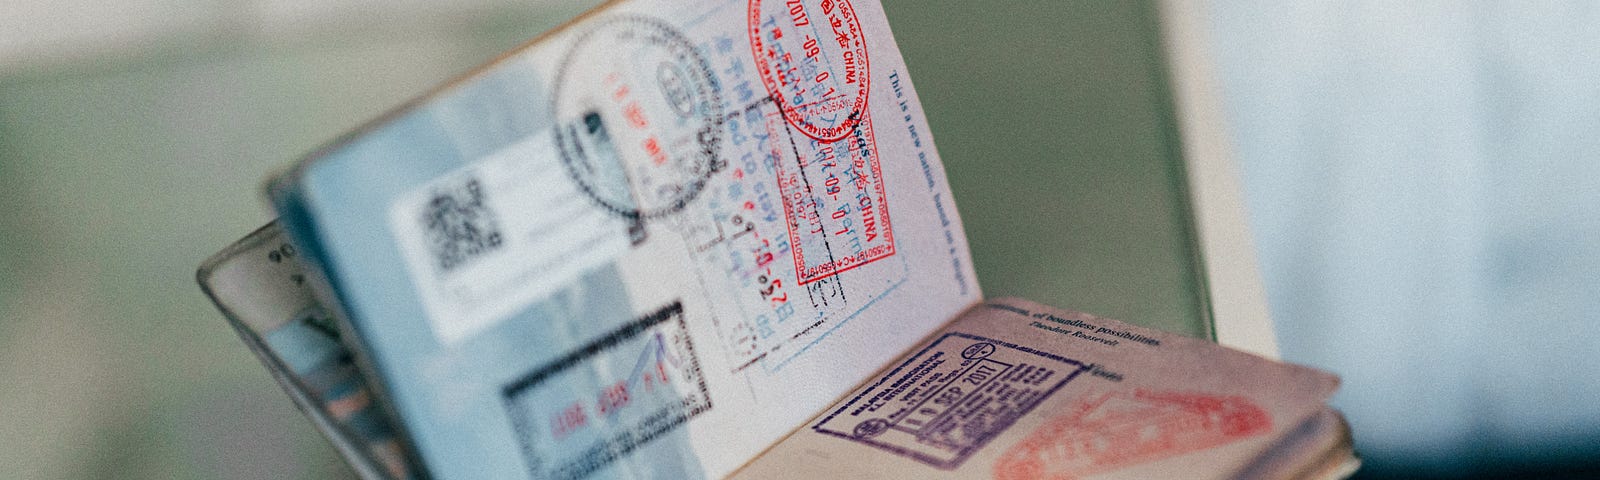 An image of a stamped Passport on a blurred table.